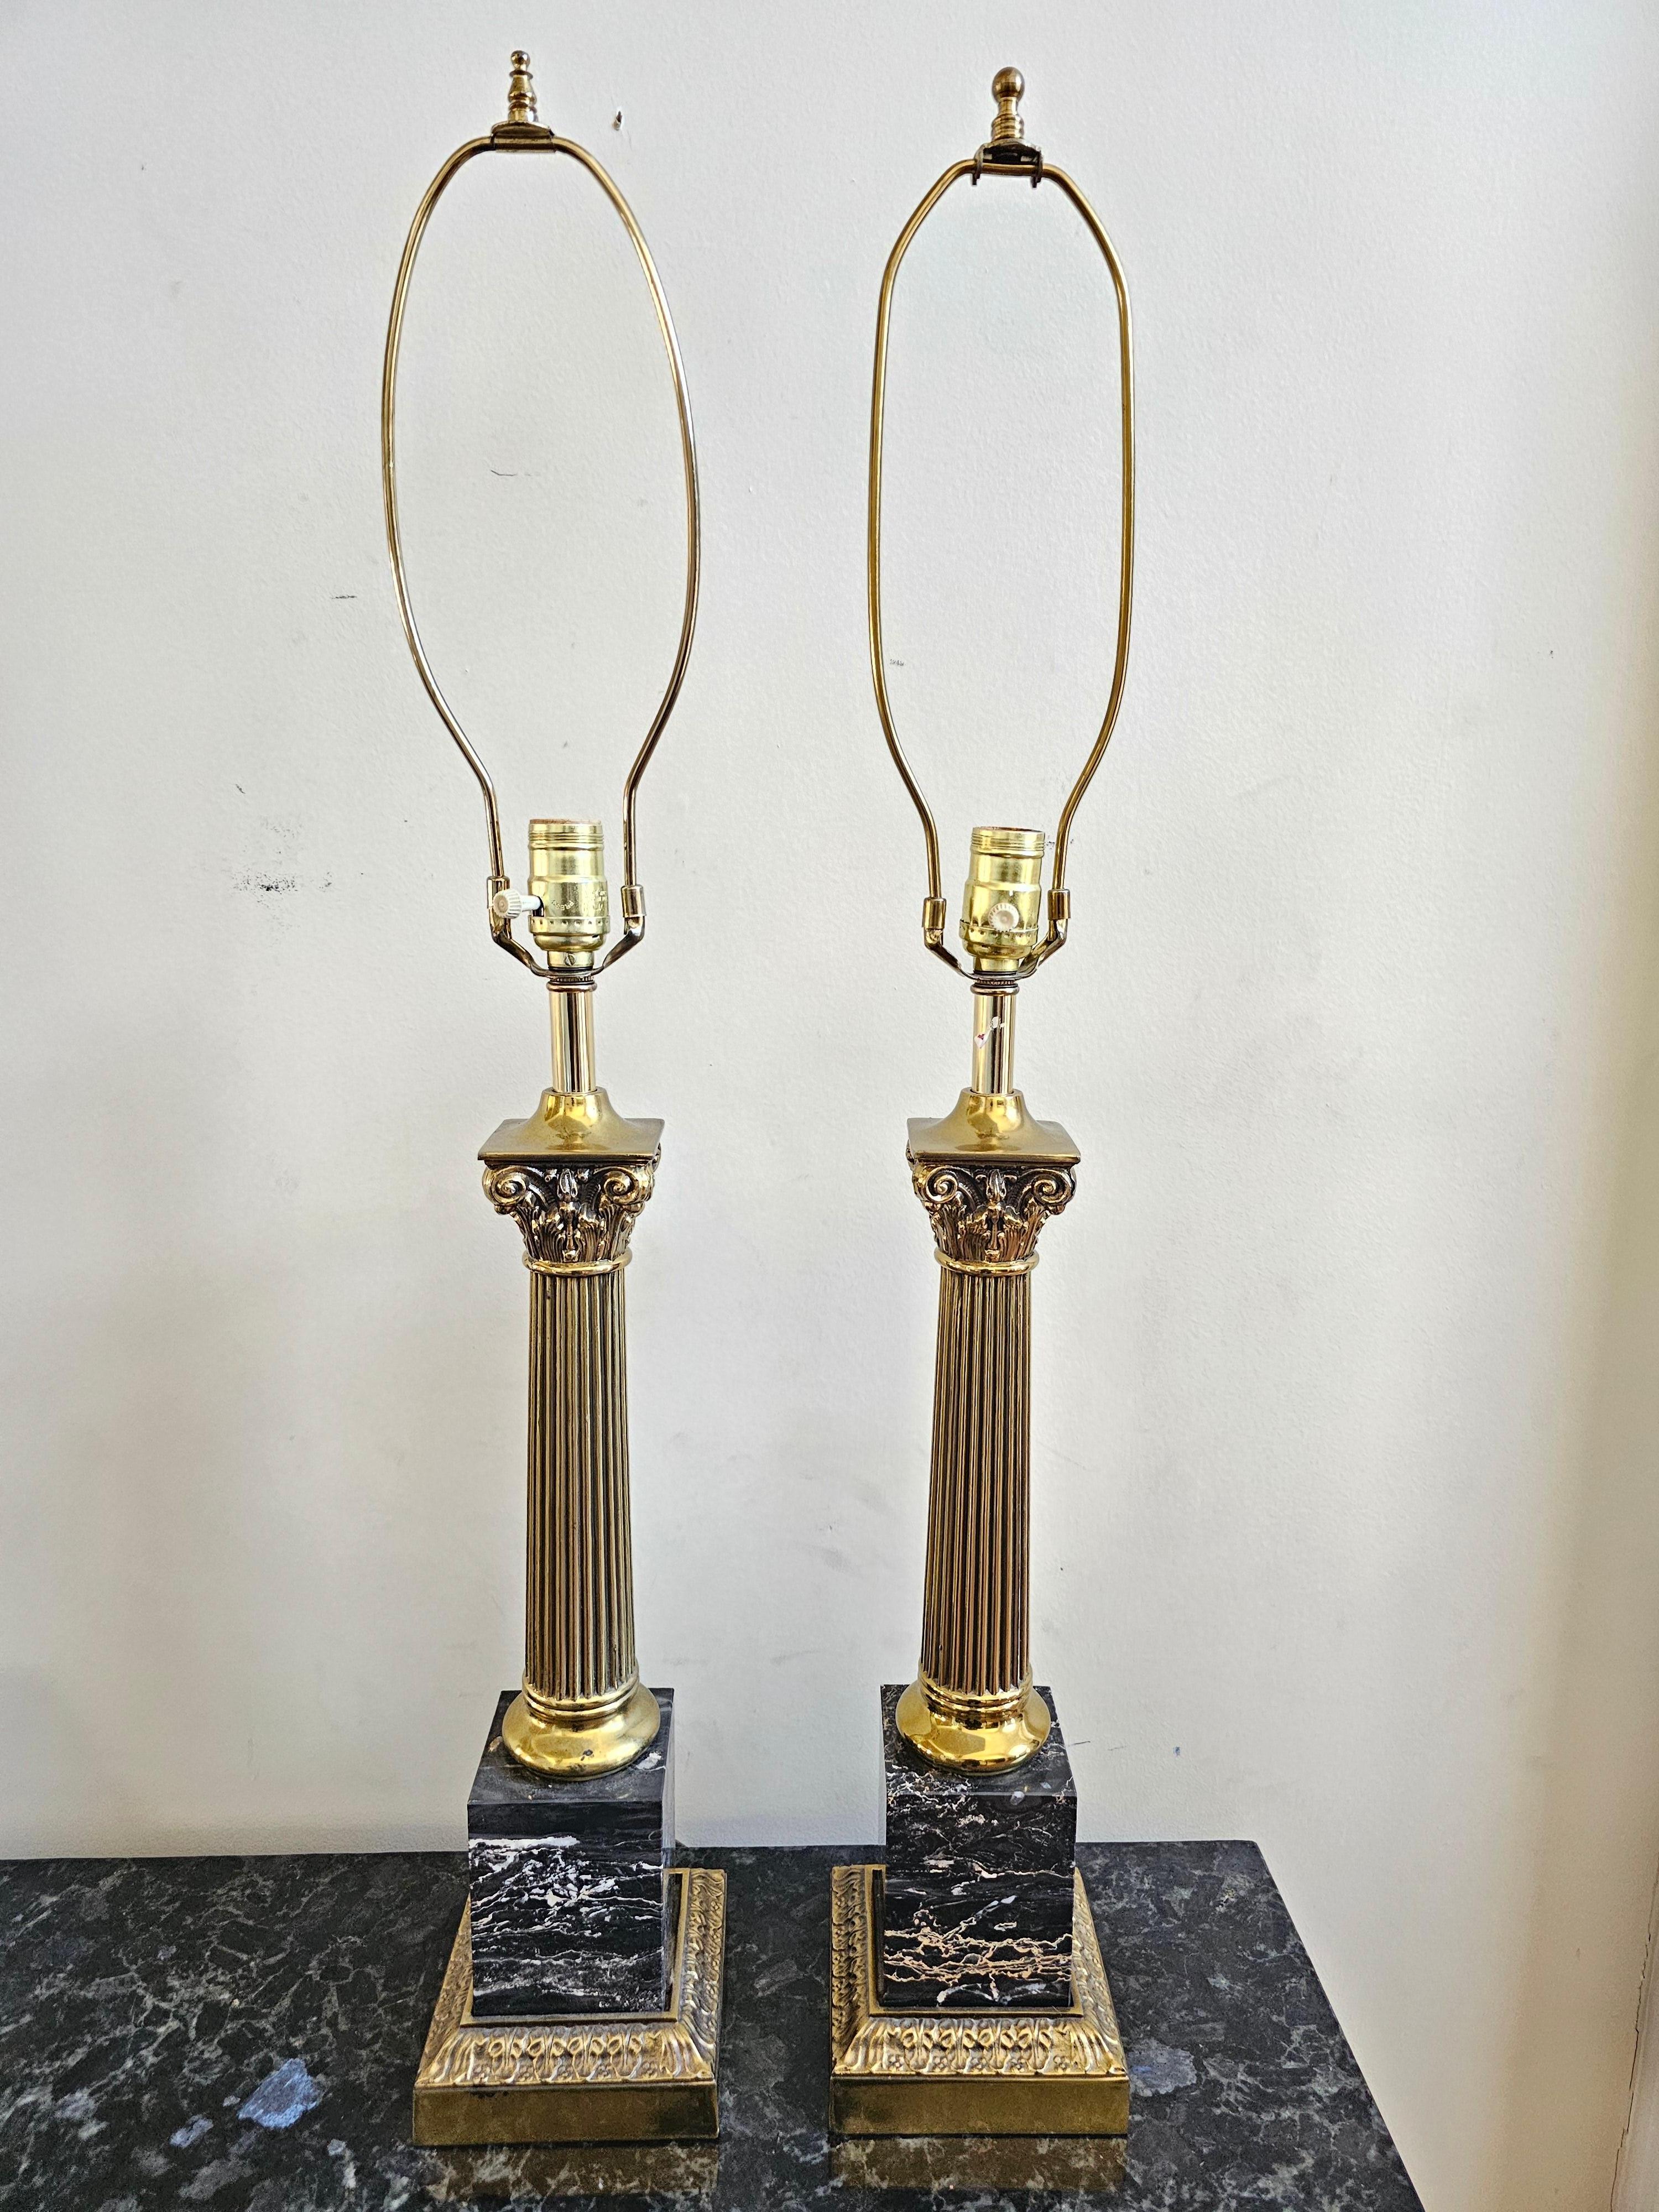 Pair Of Continental Marble And Brass Columnar Table Lamps In Good Condition For Sale In Germantown, MD